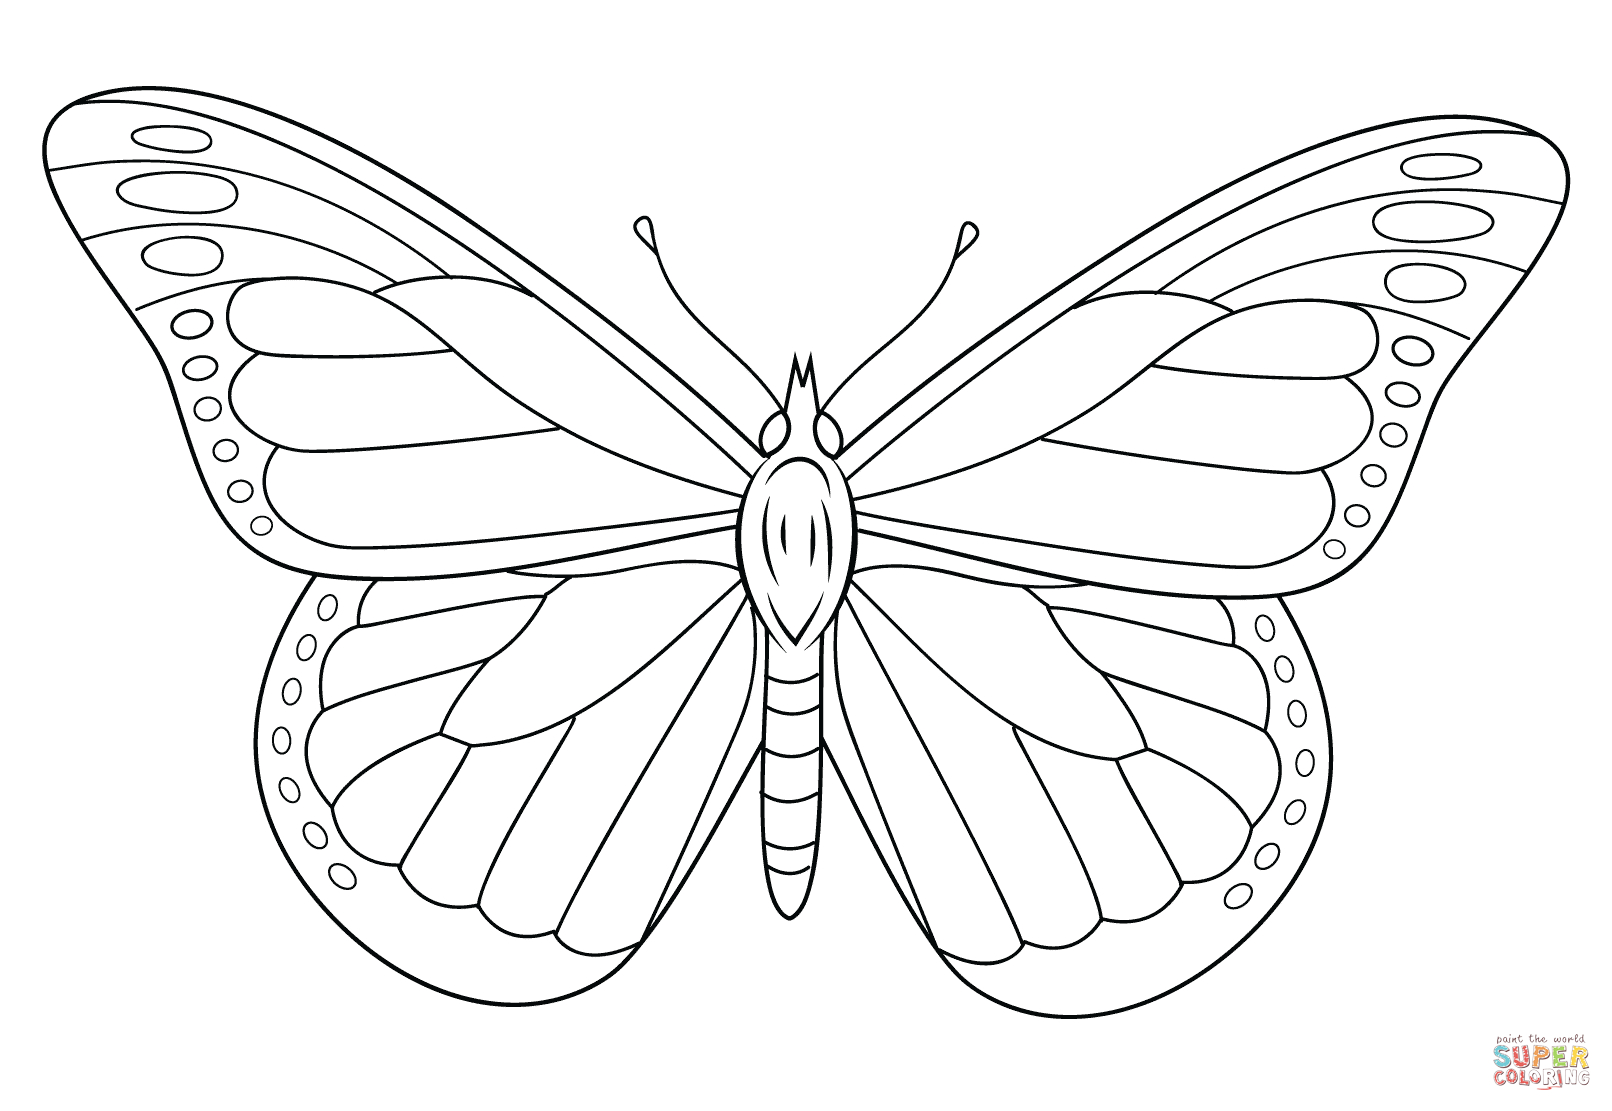 Monarch Butterfly Coloring Page | Free Printable Coloring Pages - Free Printable Butterfly Pictures